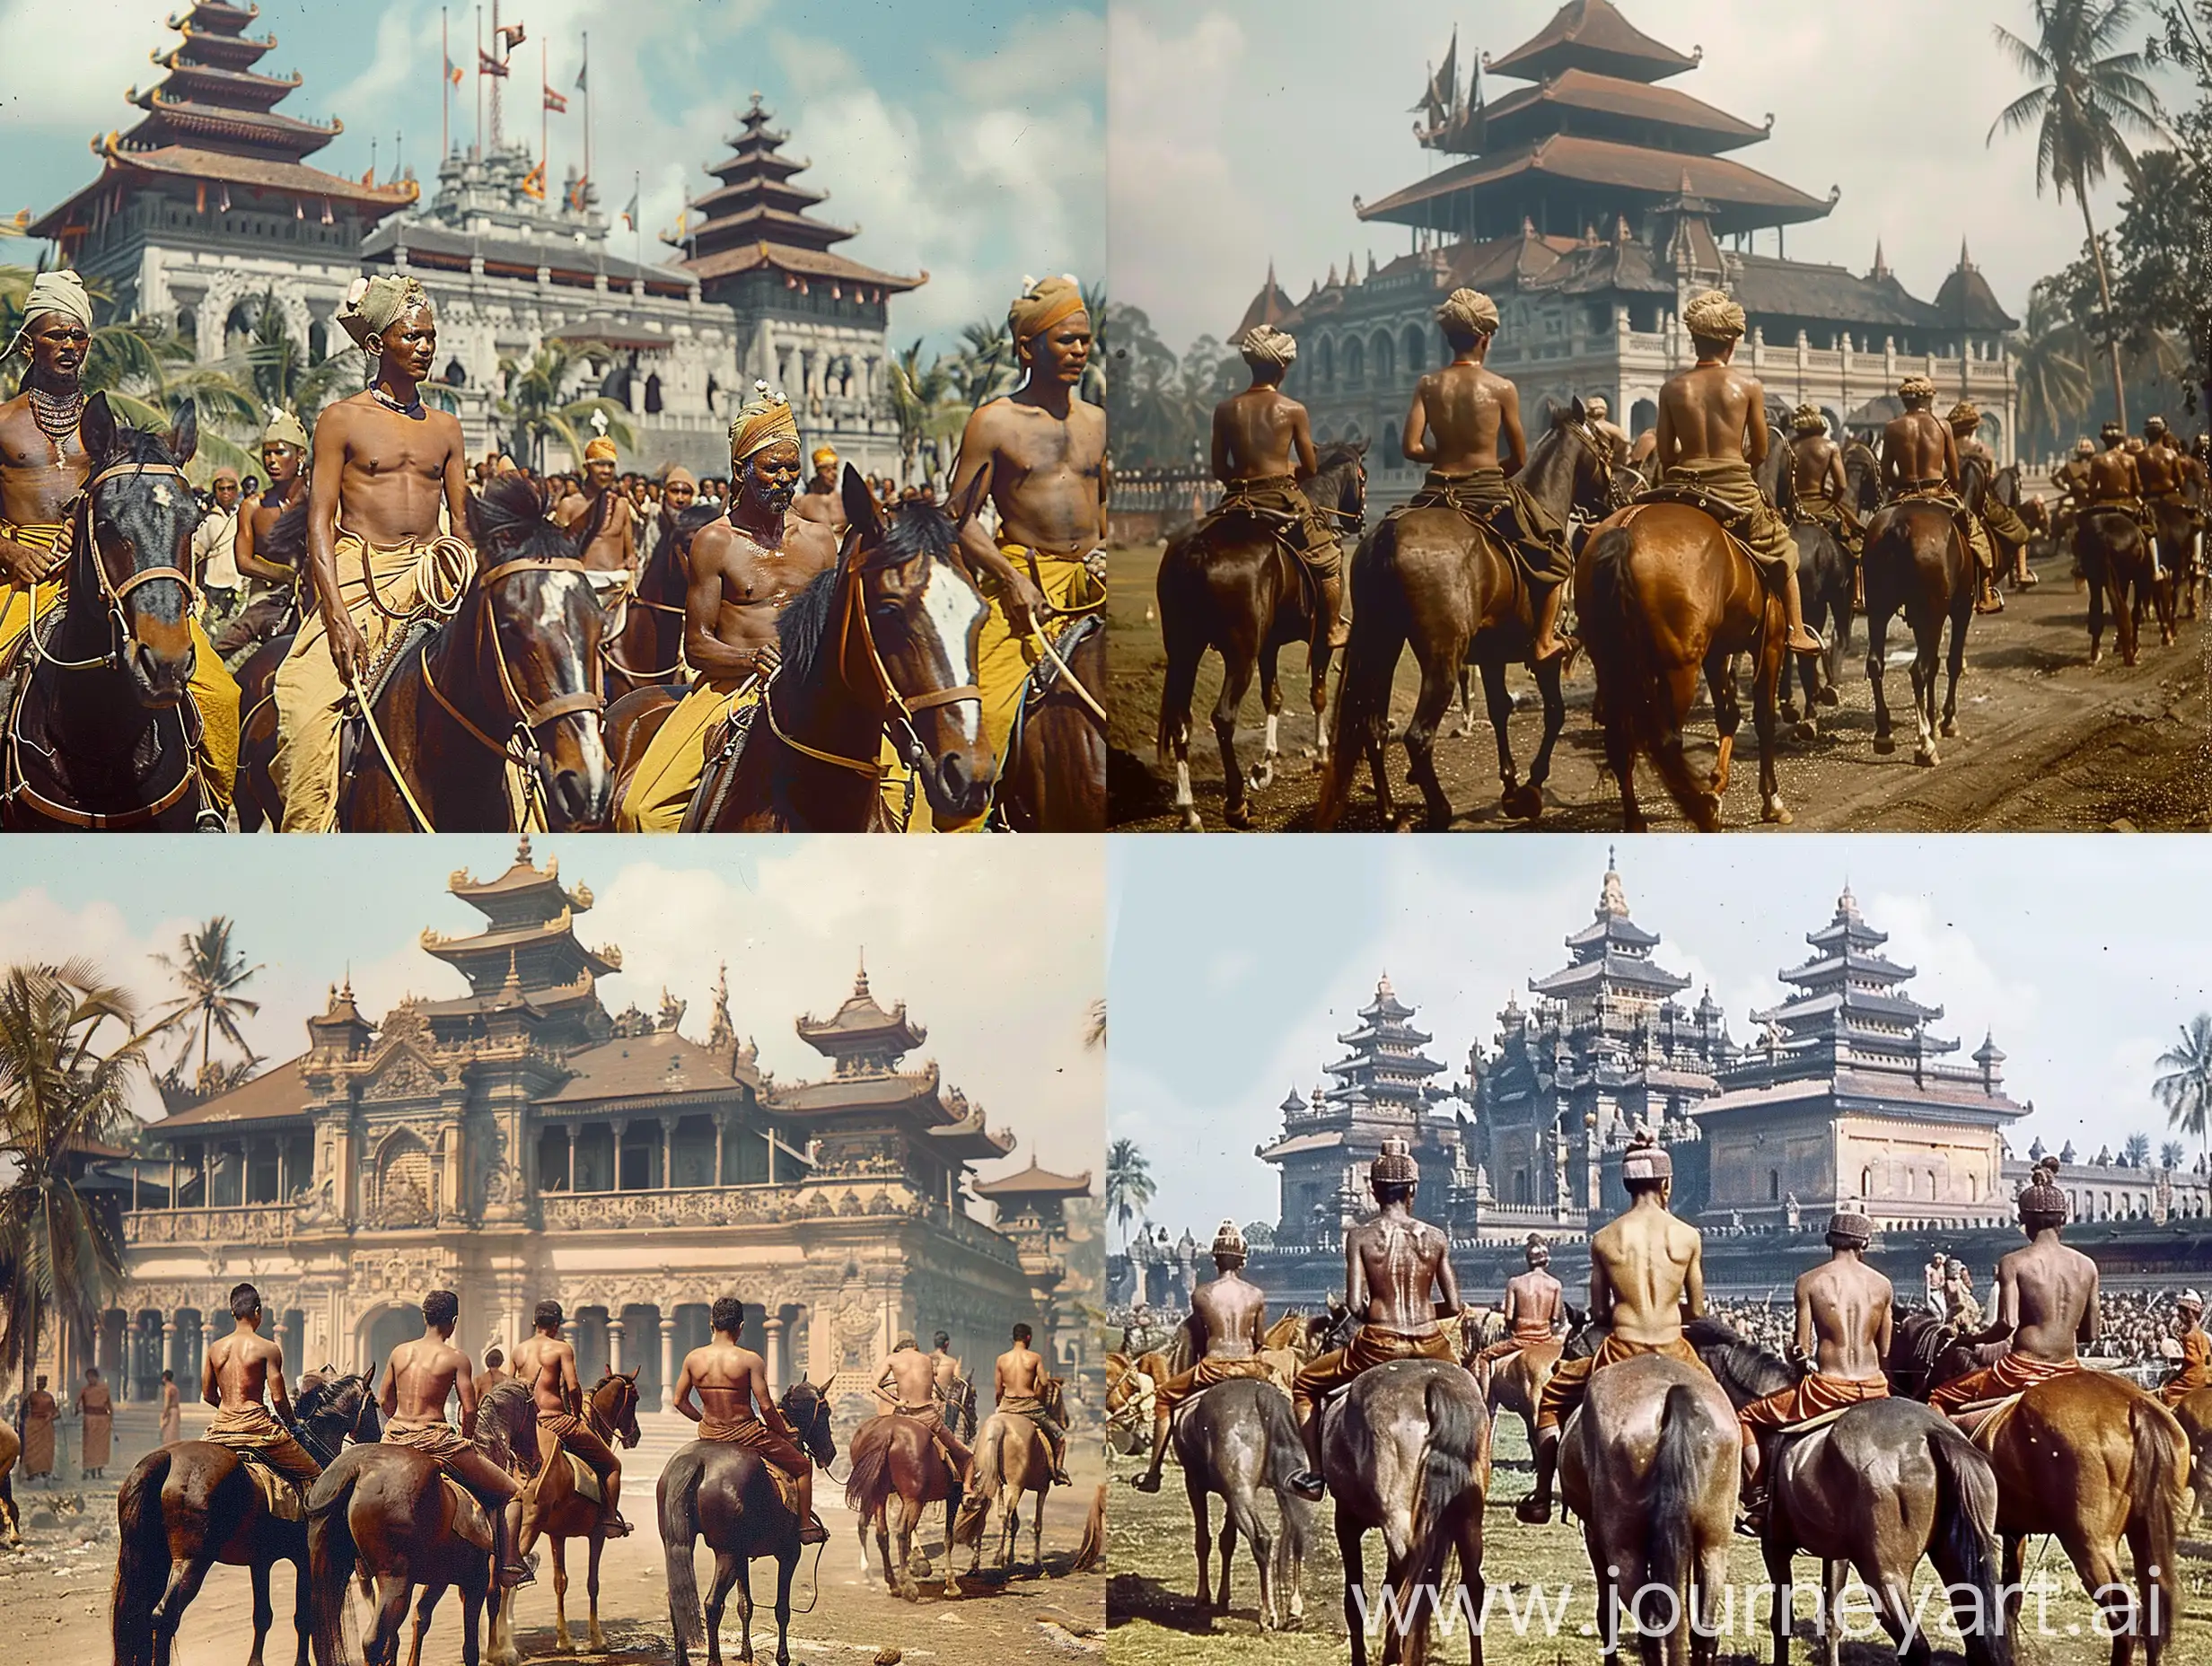 Indonesia in 1930, color, Majapahit army troops, without shirts, riding horses, in front of the palace